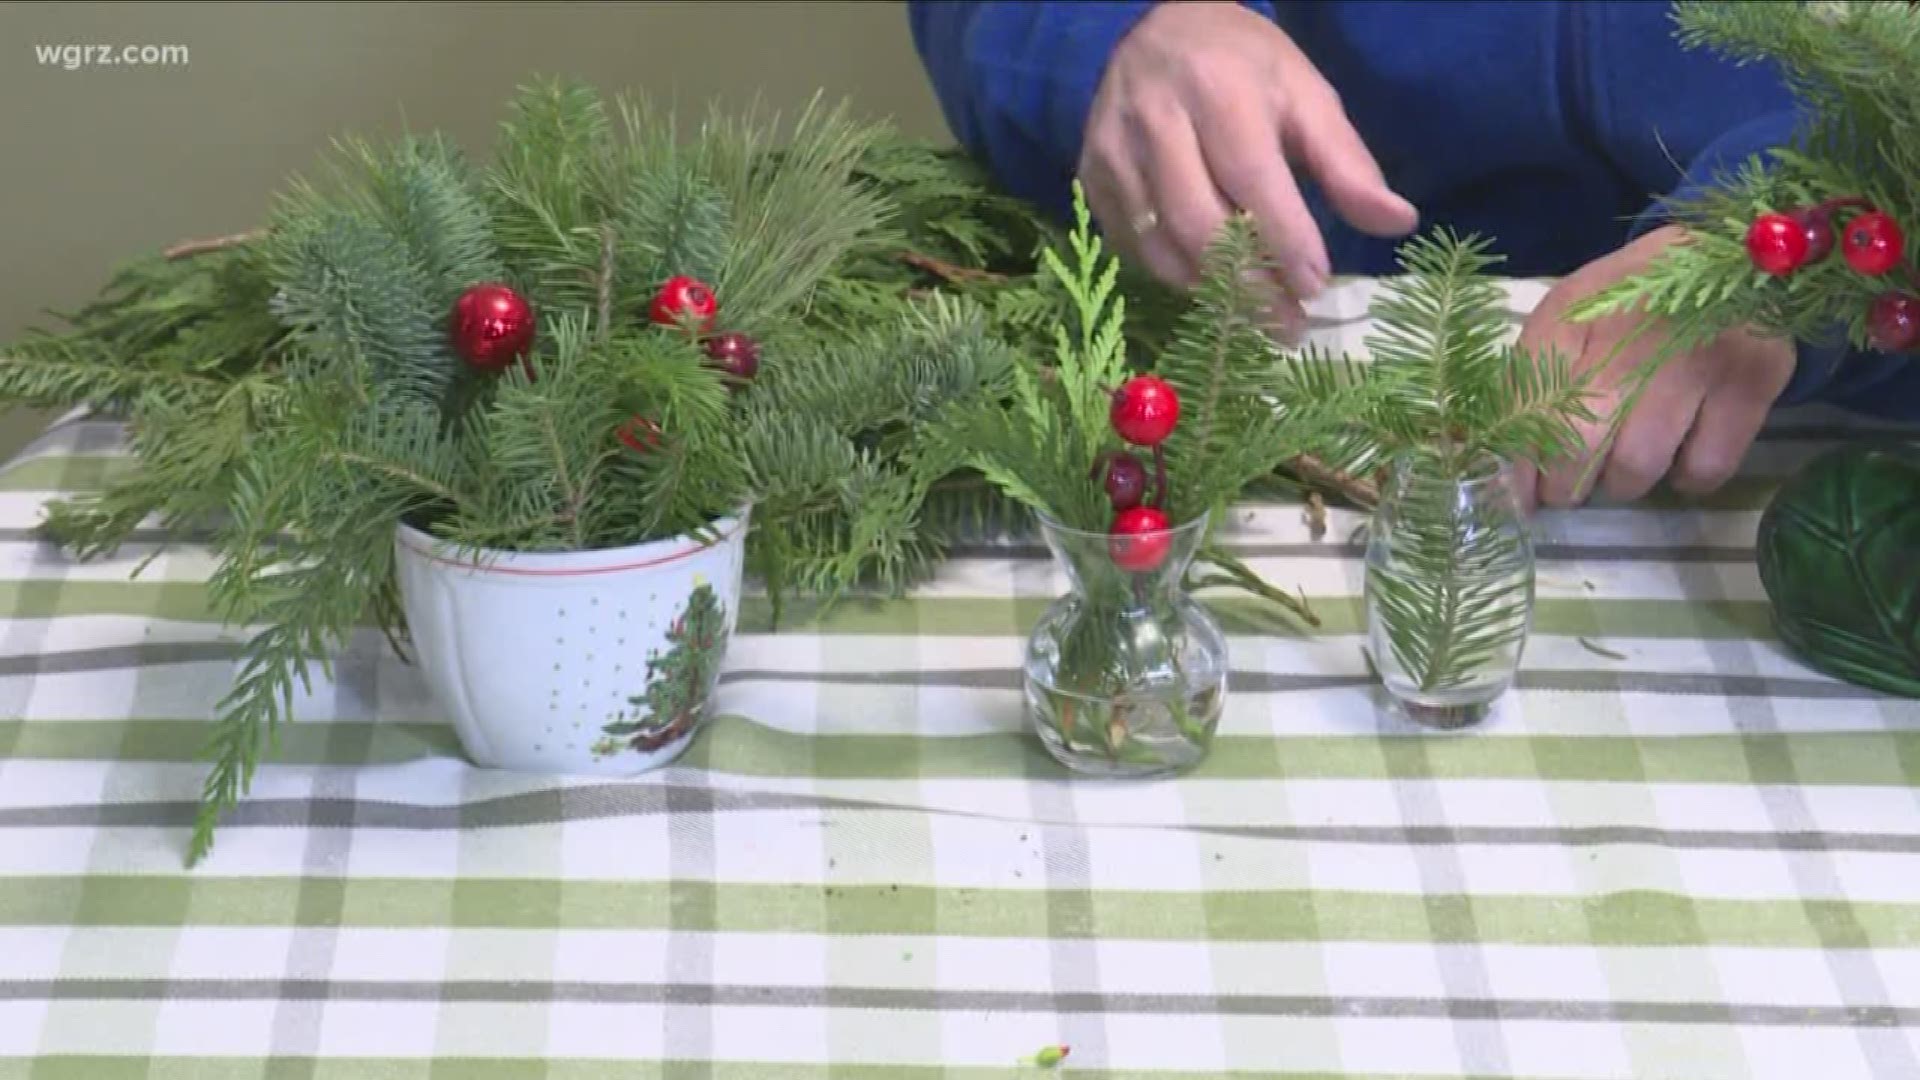 Before you drag your Christmas tree to the curb or throw out fresh wreaths, why not snip off a few branches for some easy, winter decor.